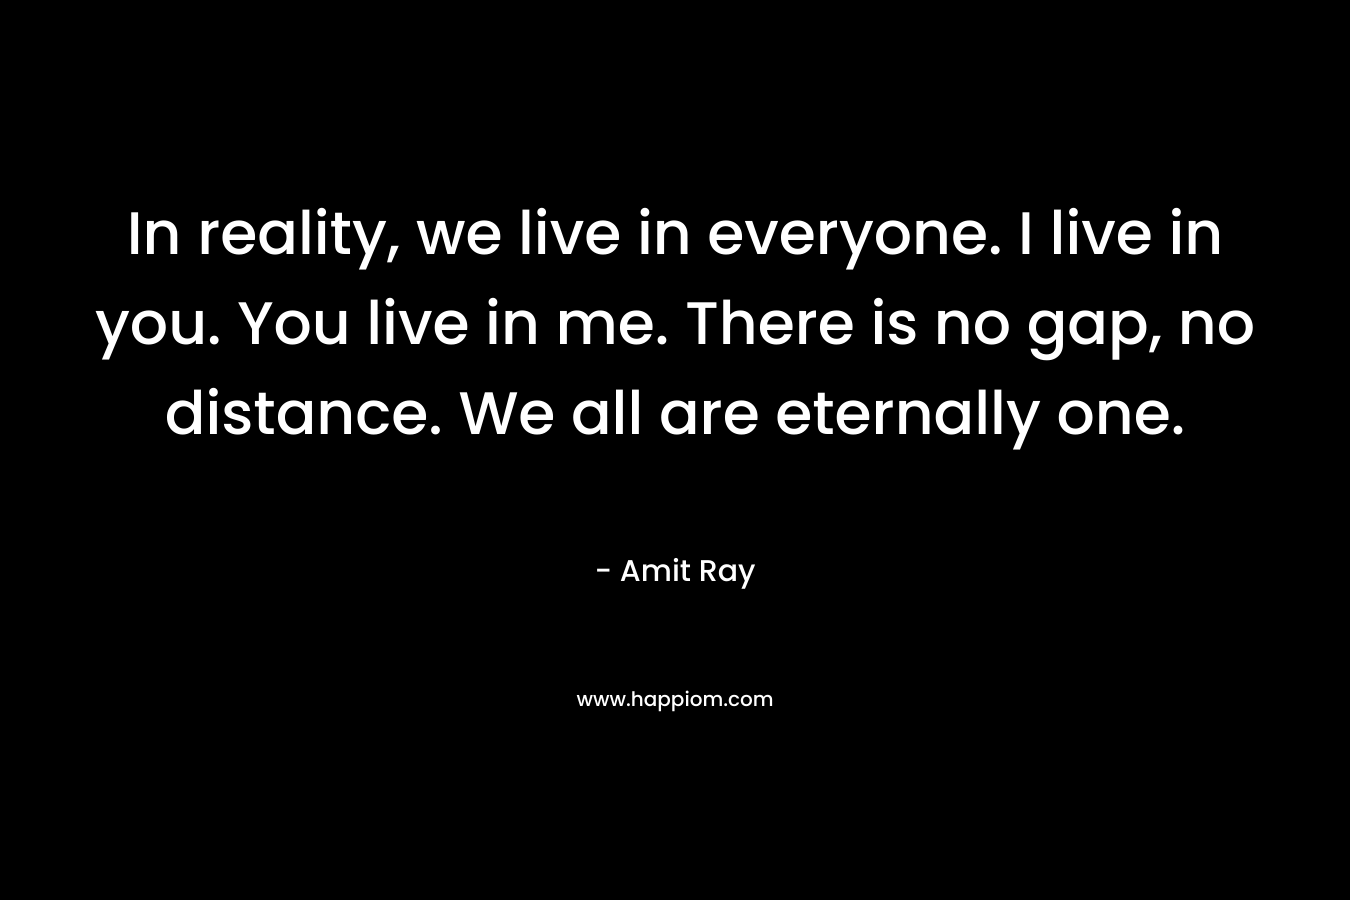 In reality, we live in everyone. I live in you. You live in me. There is no gap, no distance. We all are eternally one.